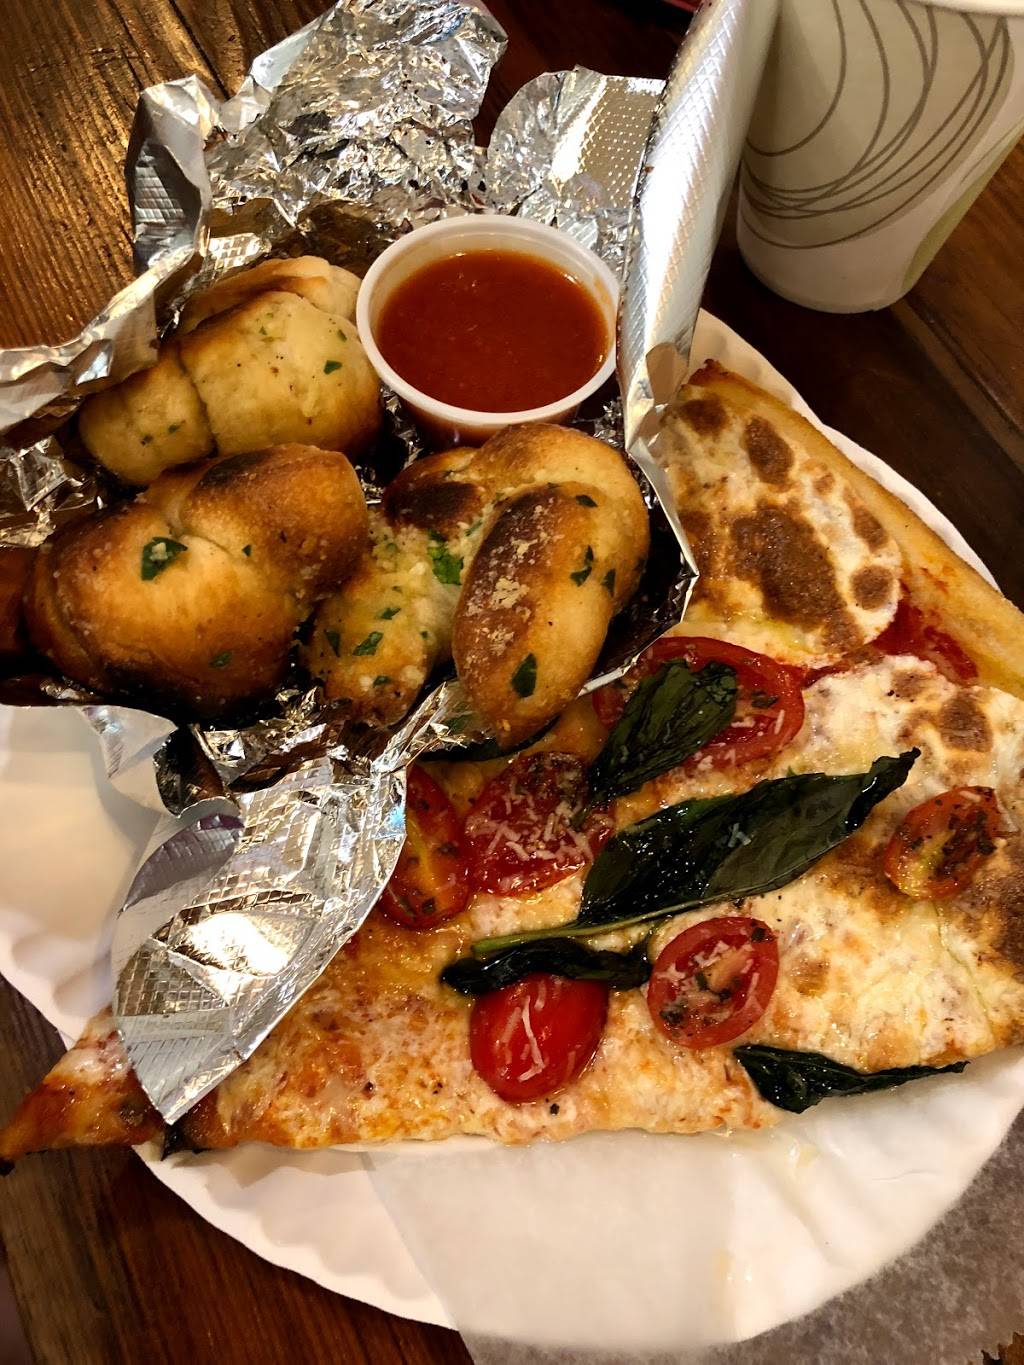 Joe & Sals Pizzeria | meal delivery | 842 Franklin Ave, Brooklyn, NY 11225, USA | 7184848732 OR +1 718-484-8732